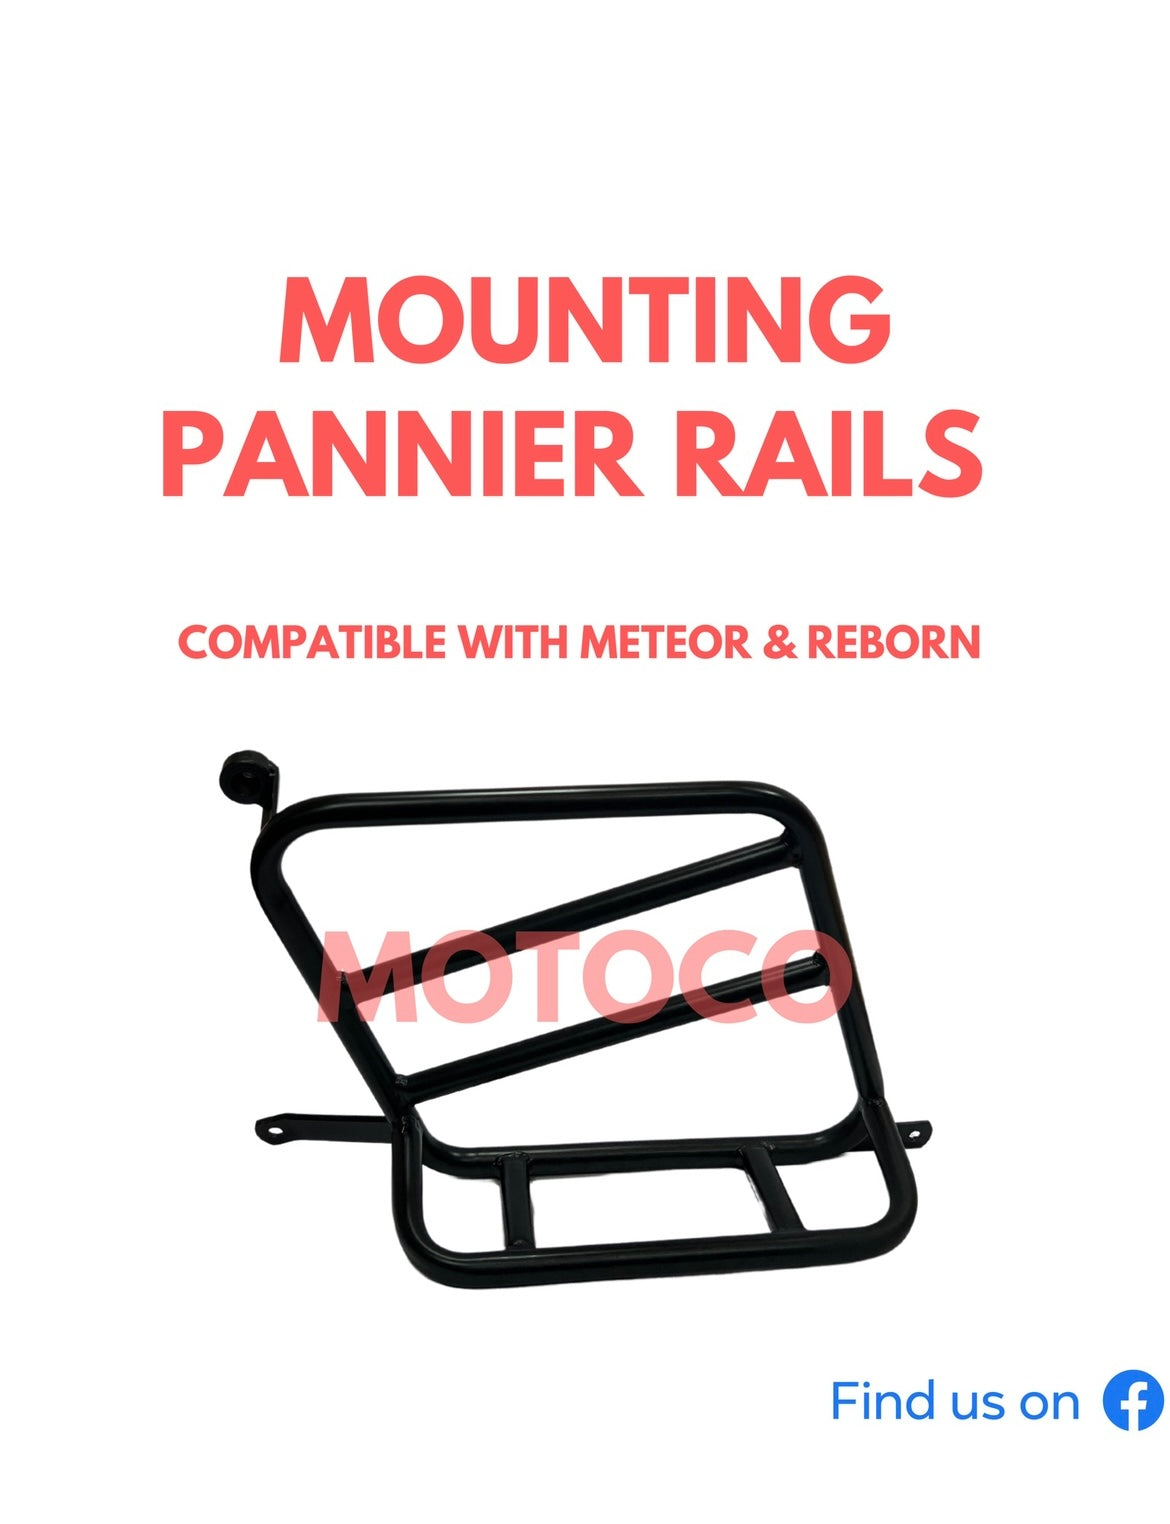 Mounting Pannier Rails For Meteor 350 & Classic Reborn